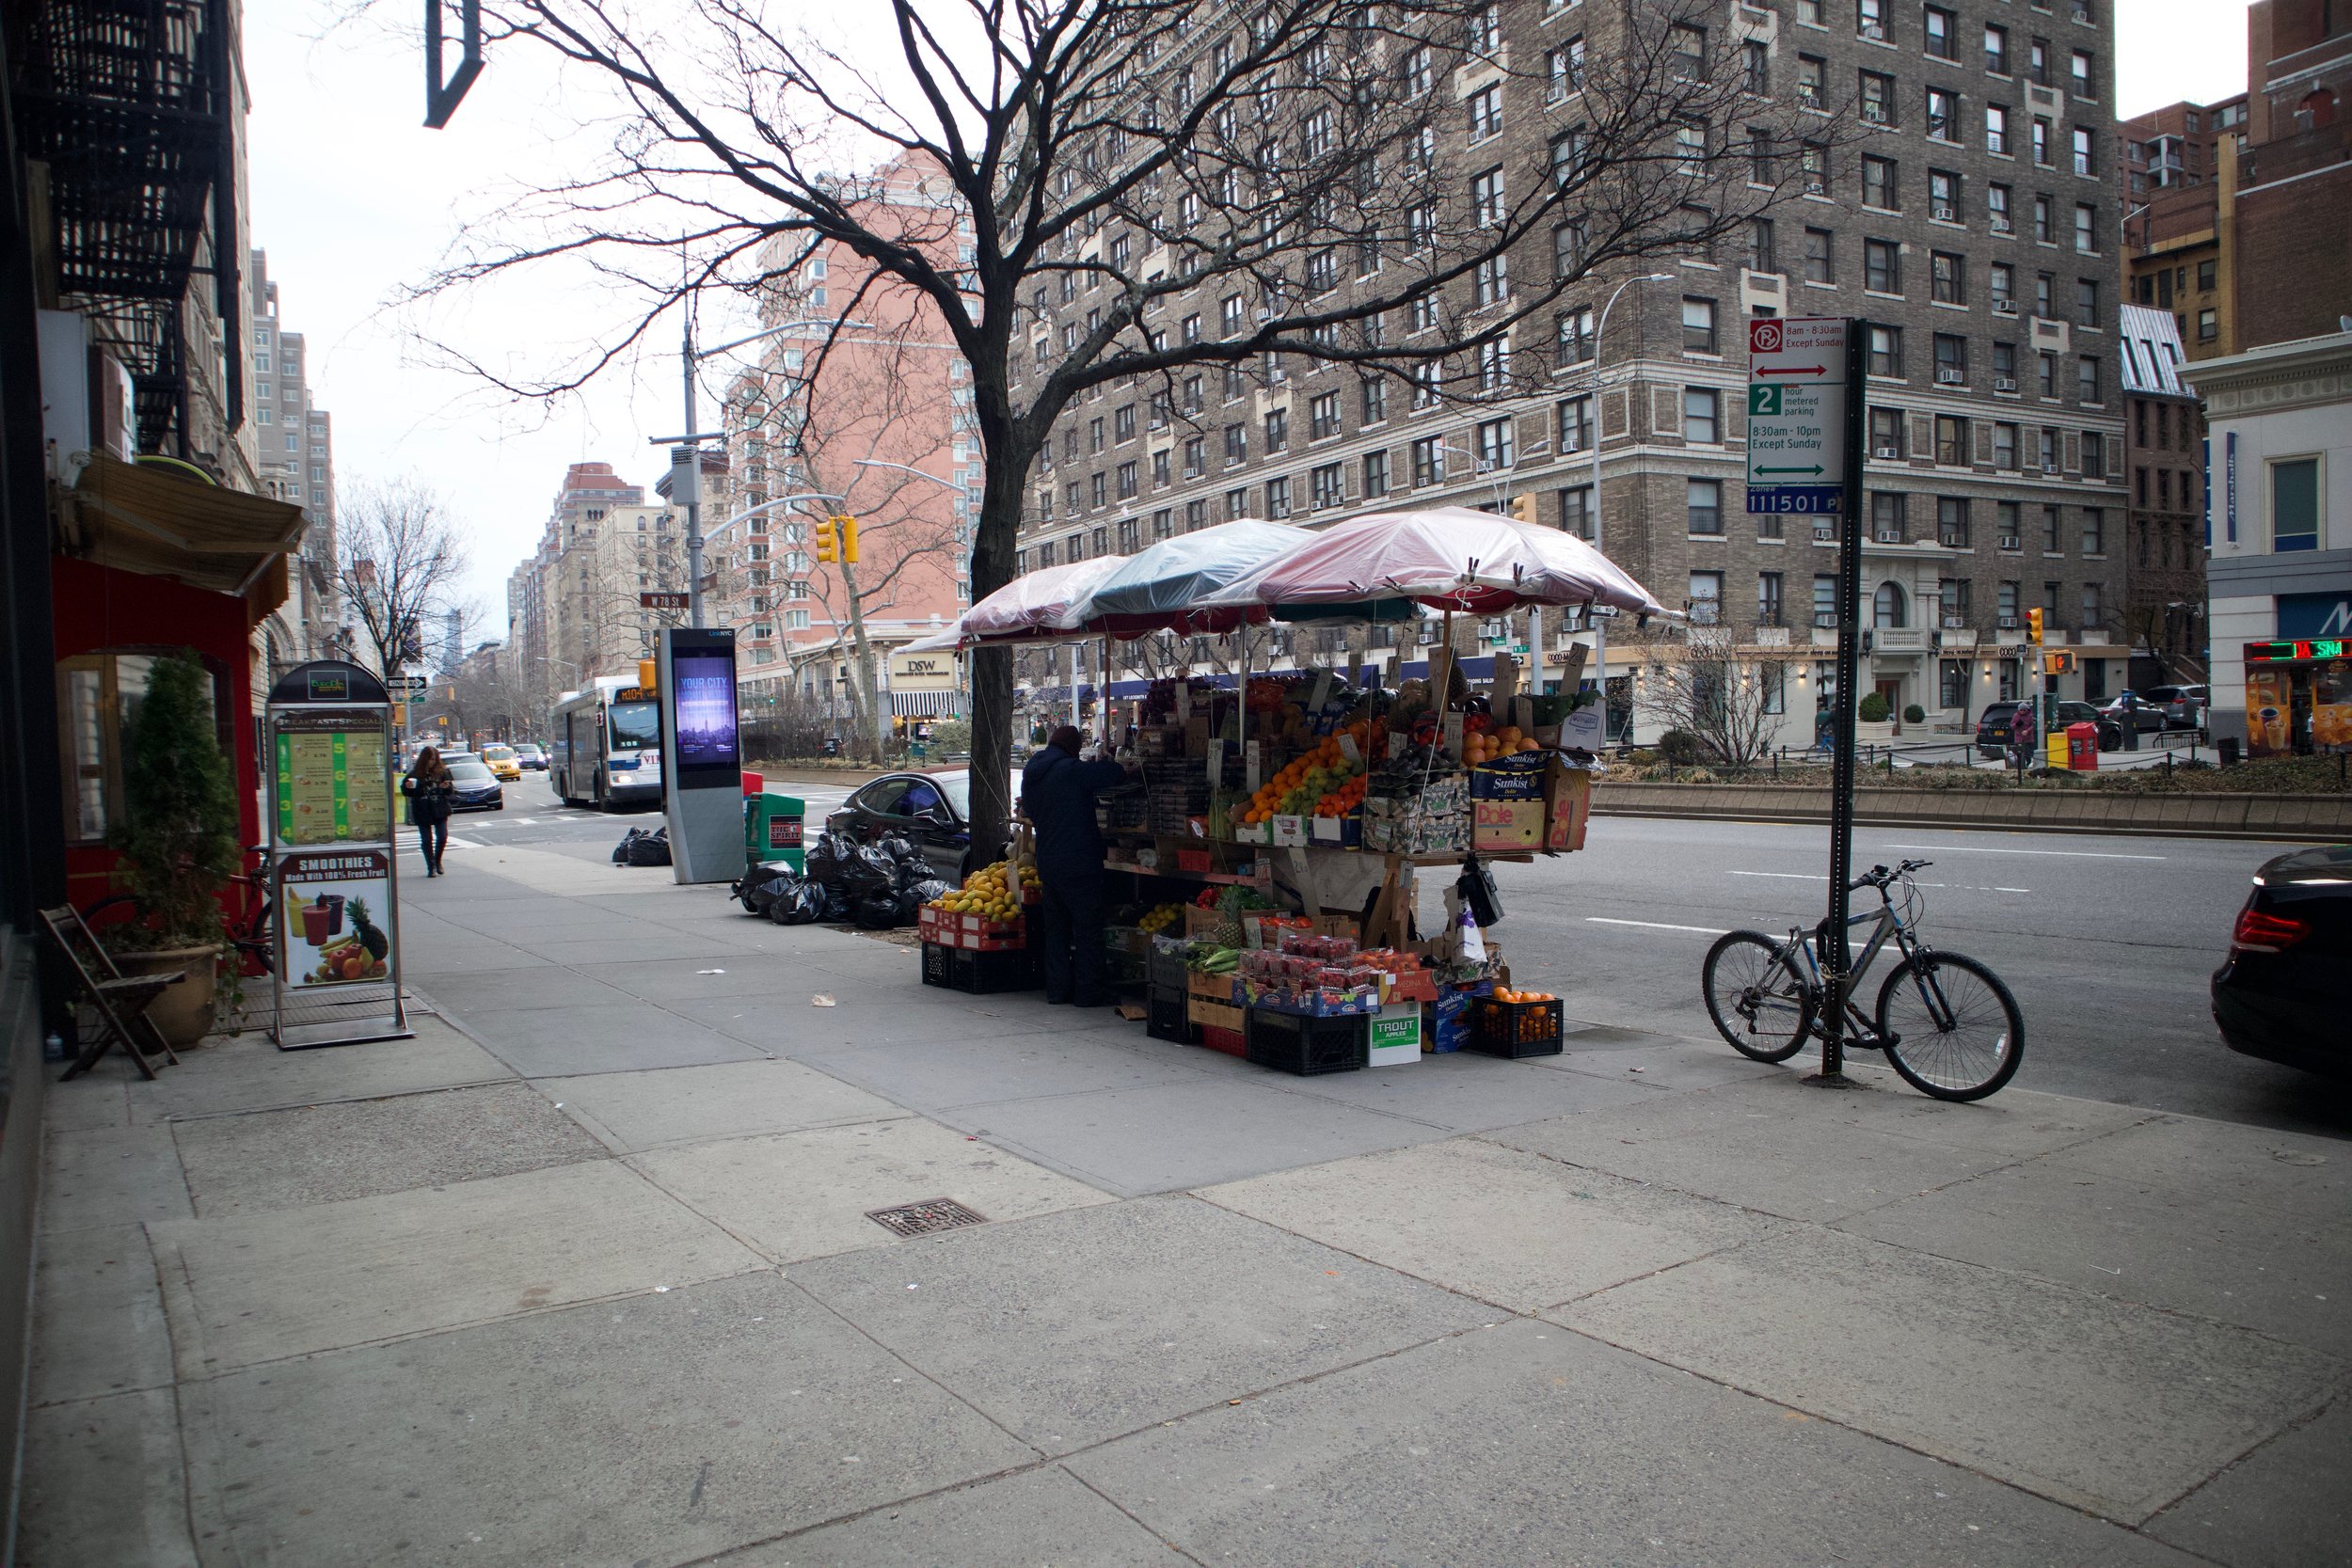 A fruit stand in New York